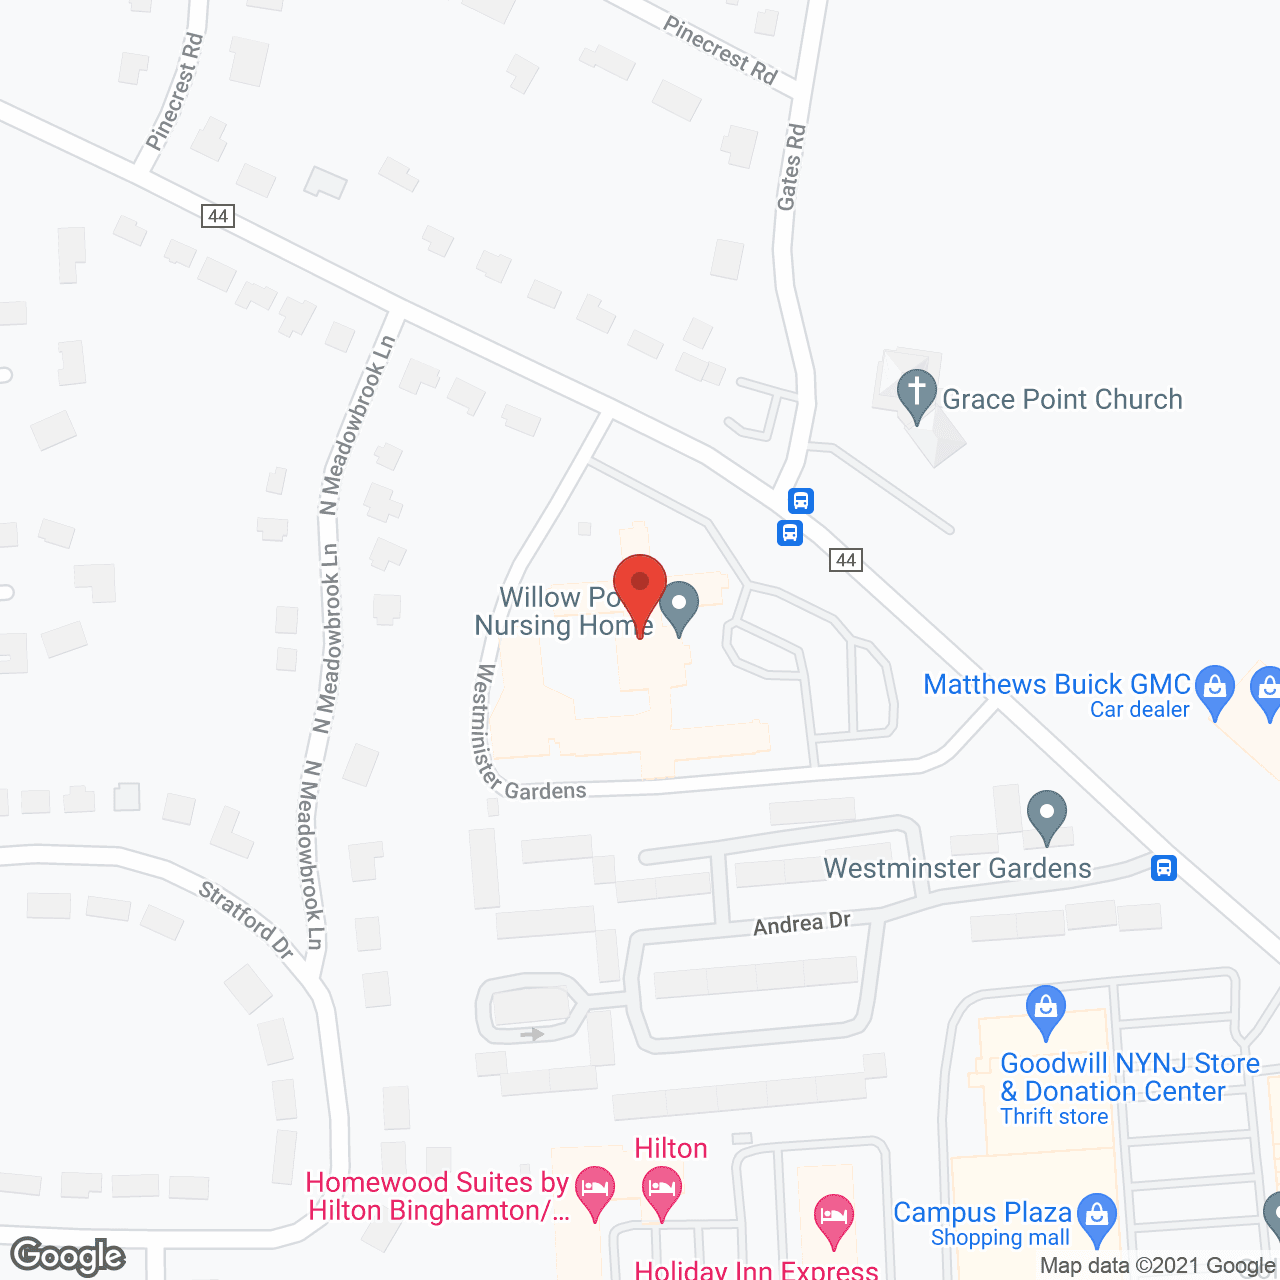 Willow Point Nursing Home in google map